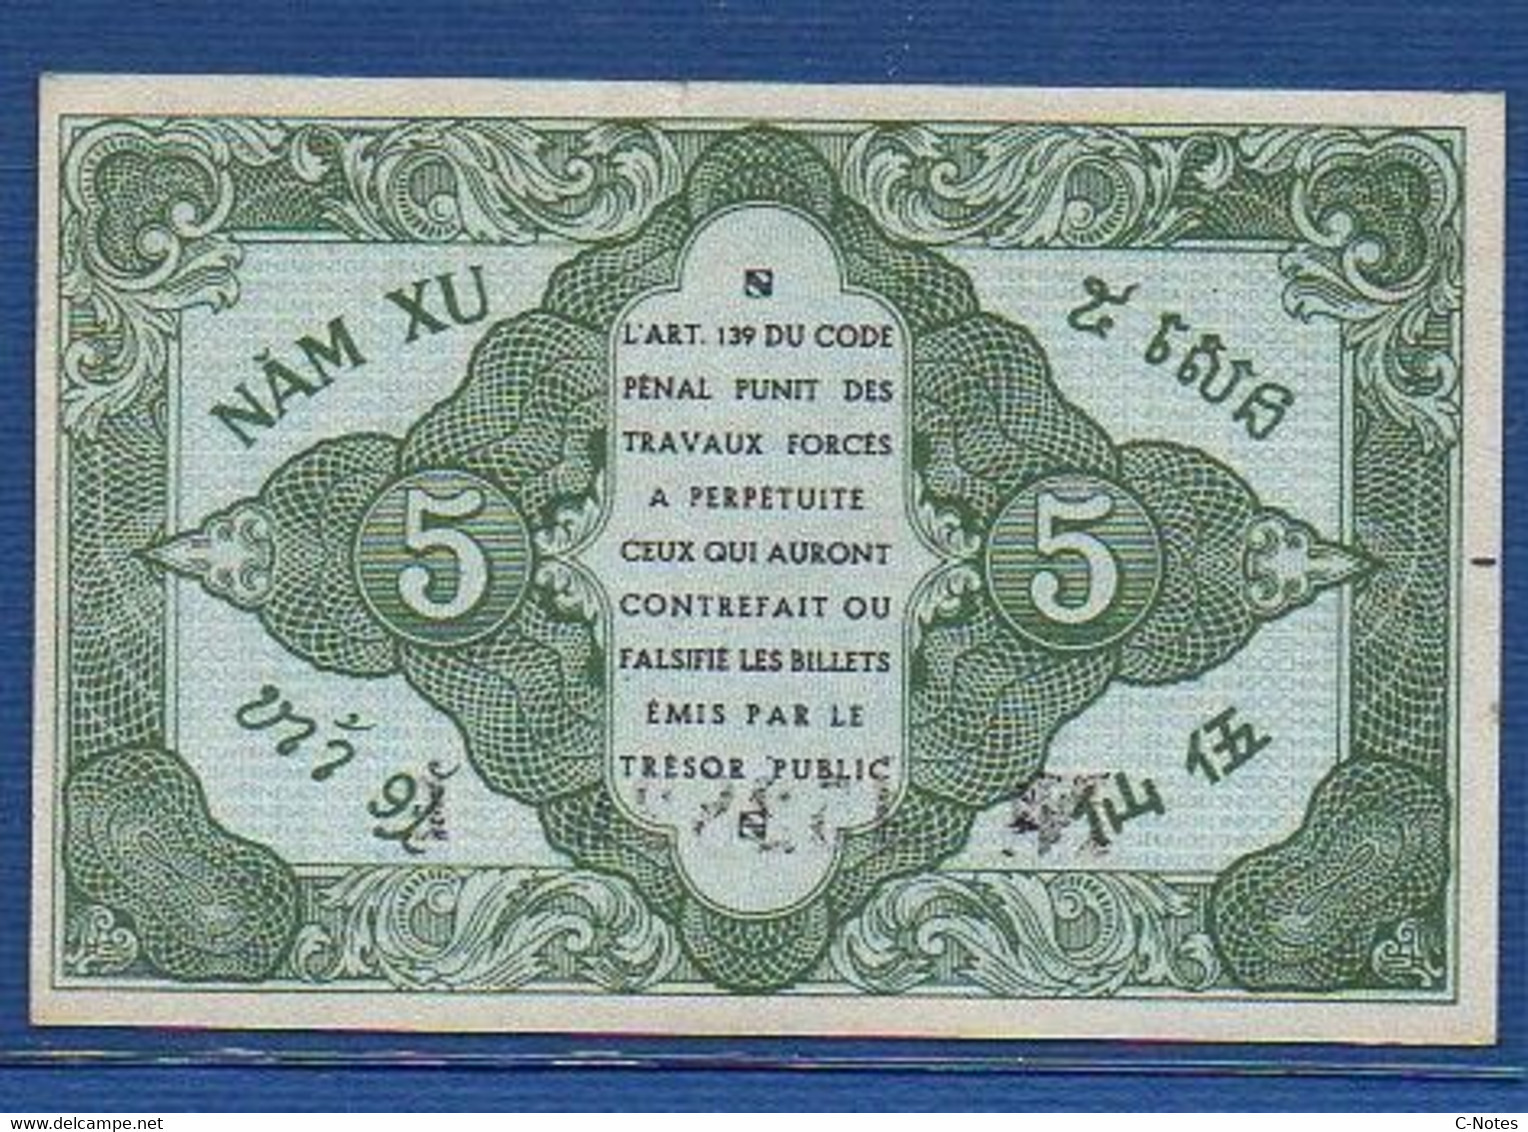 FRENCH INDOCHINA - P. 88a –  5 Cents ND (1942) AUNC-, S/n 452825 E - Indochina